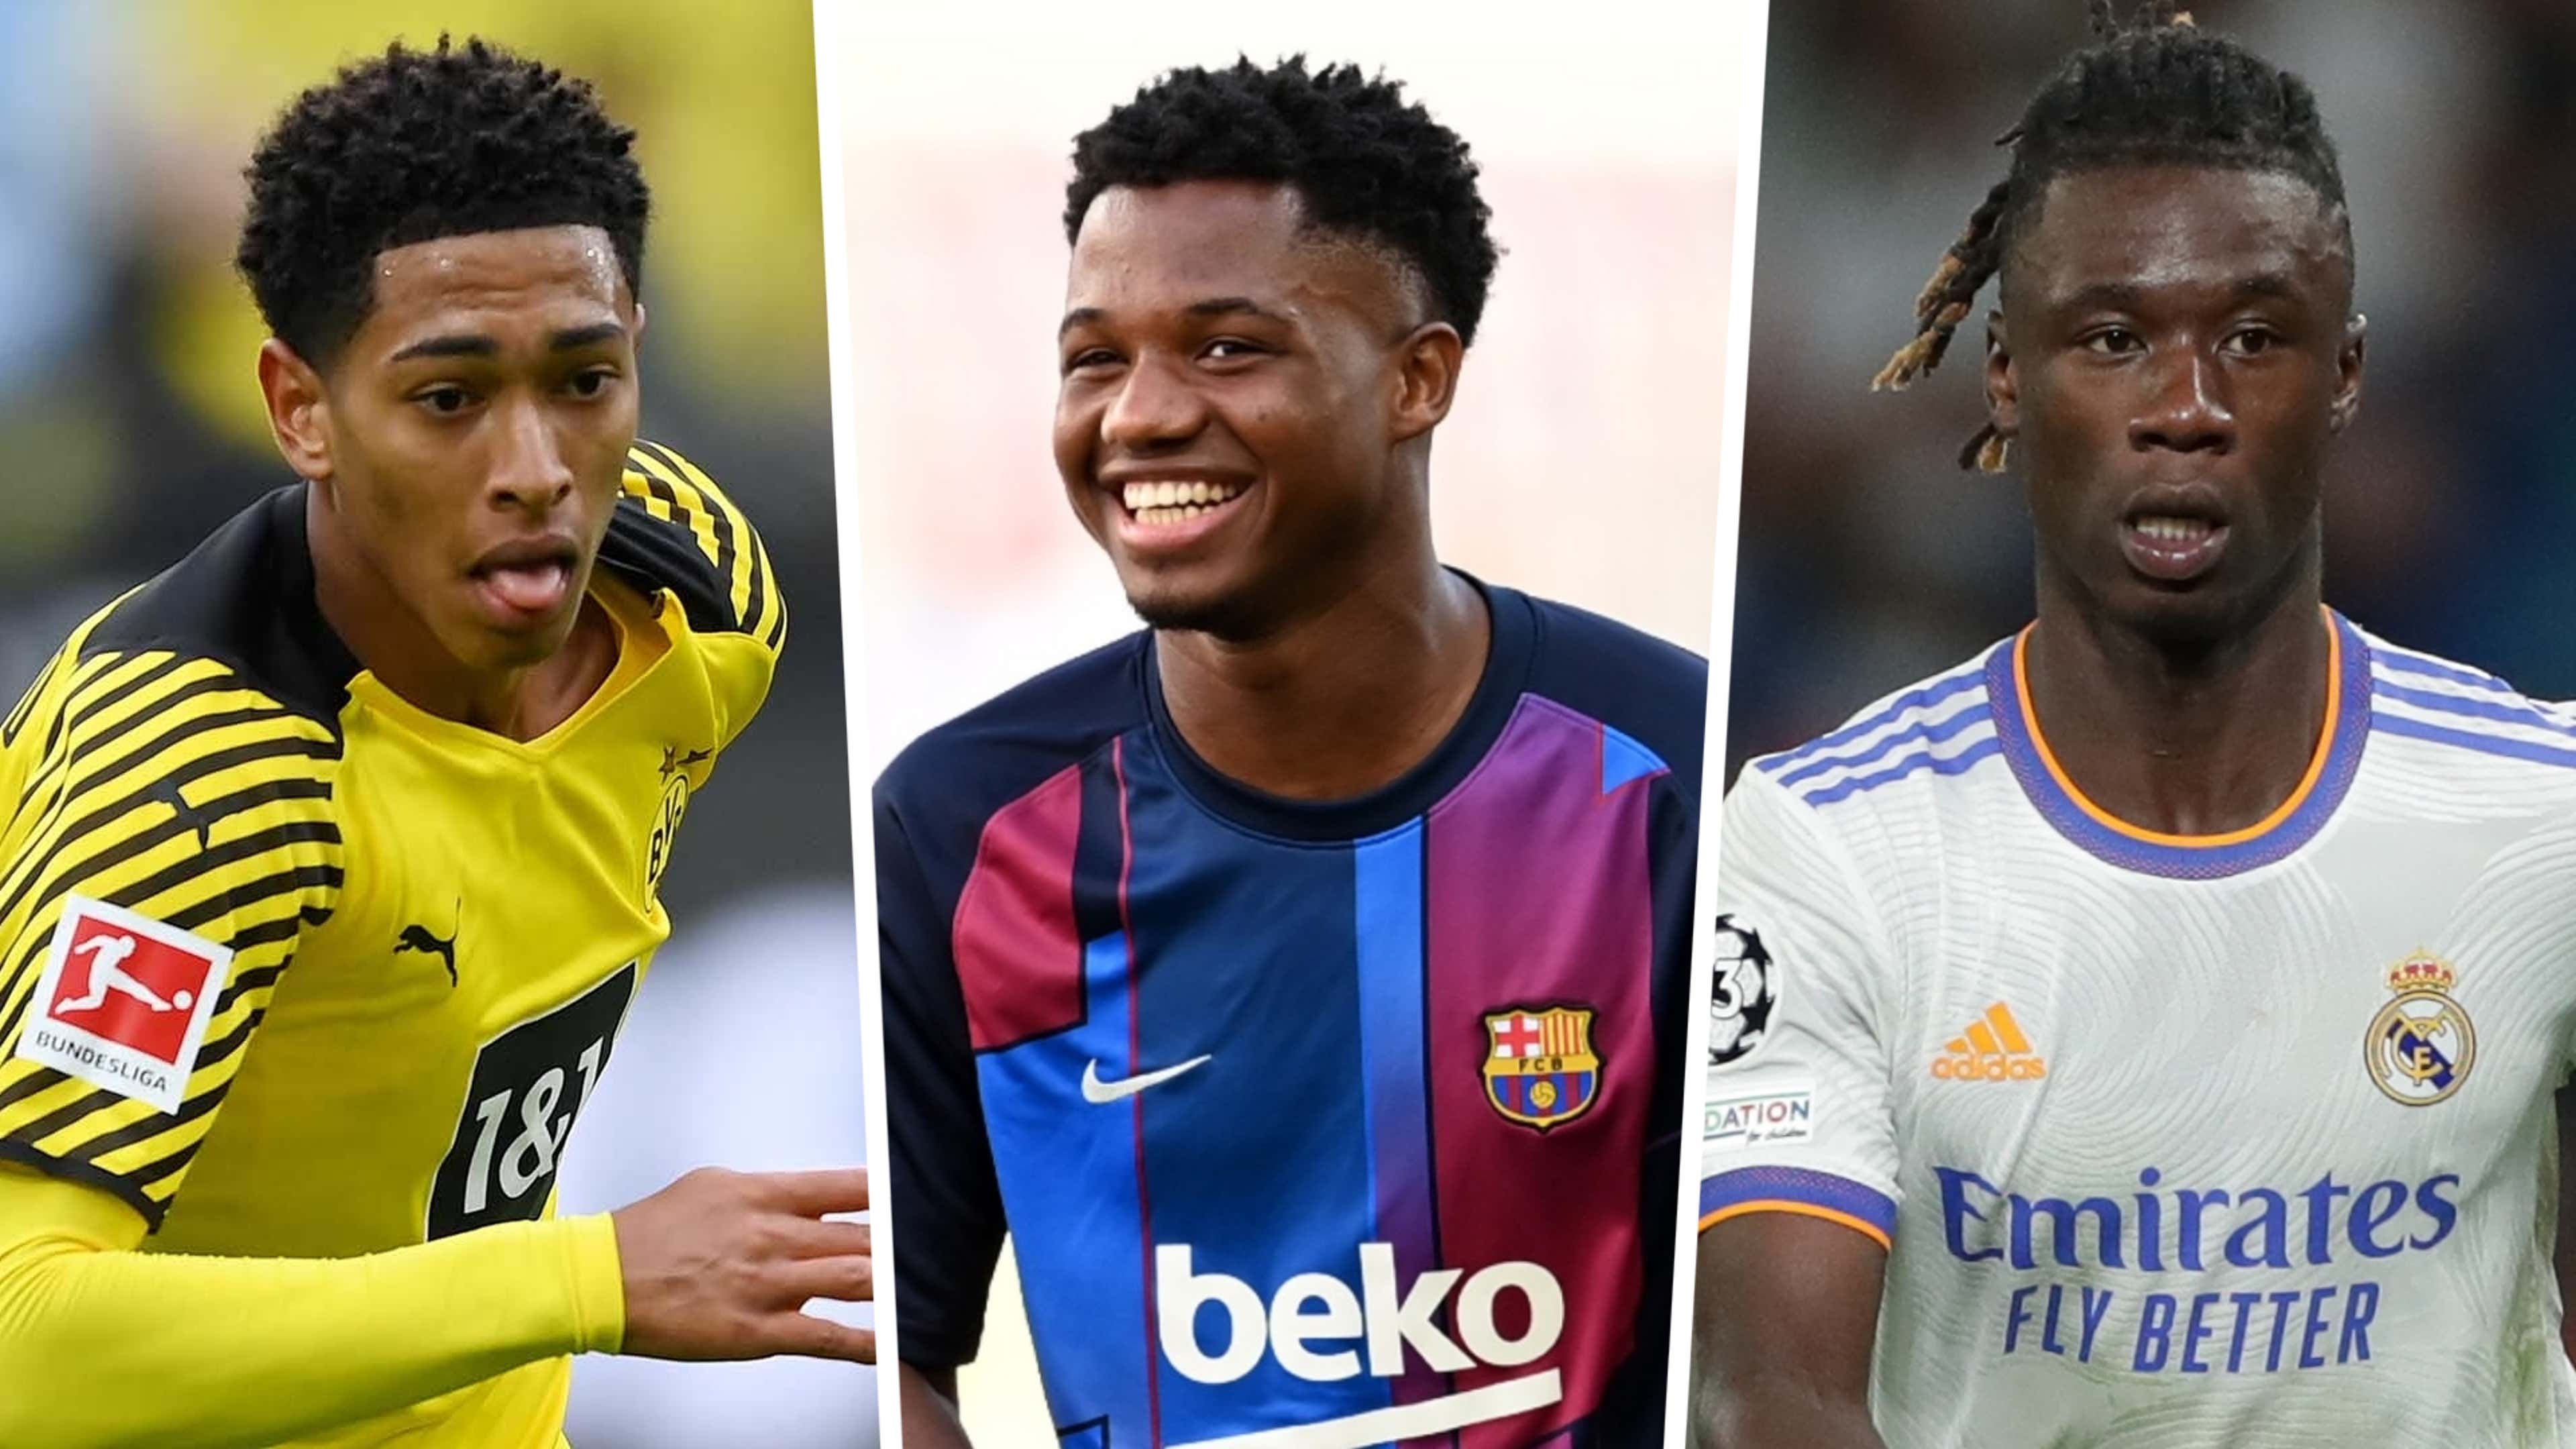 Football Manager 2022: All the FM22 wonderkids you'll need to sign